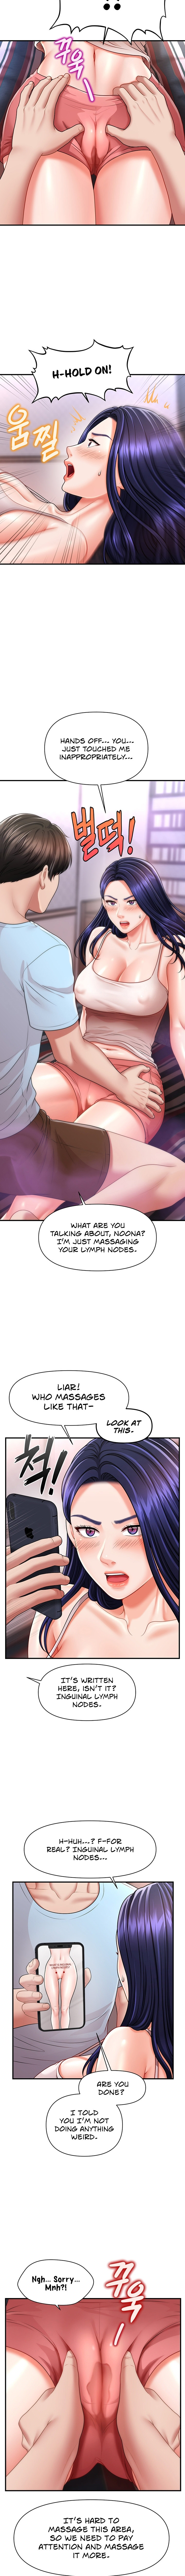 How to Conquer Women with Hypnosis - Chapter 5 Page 10